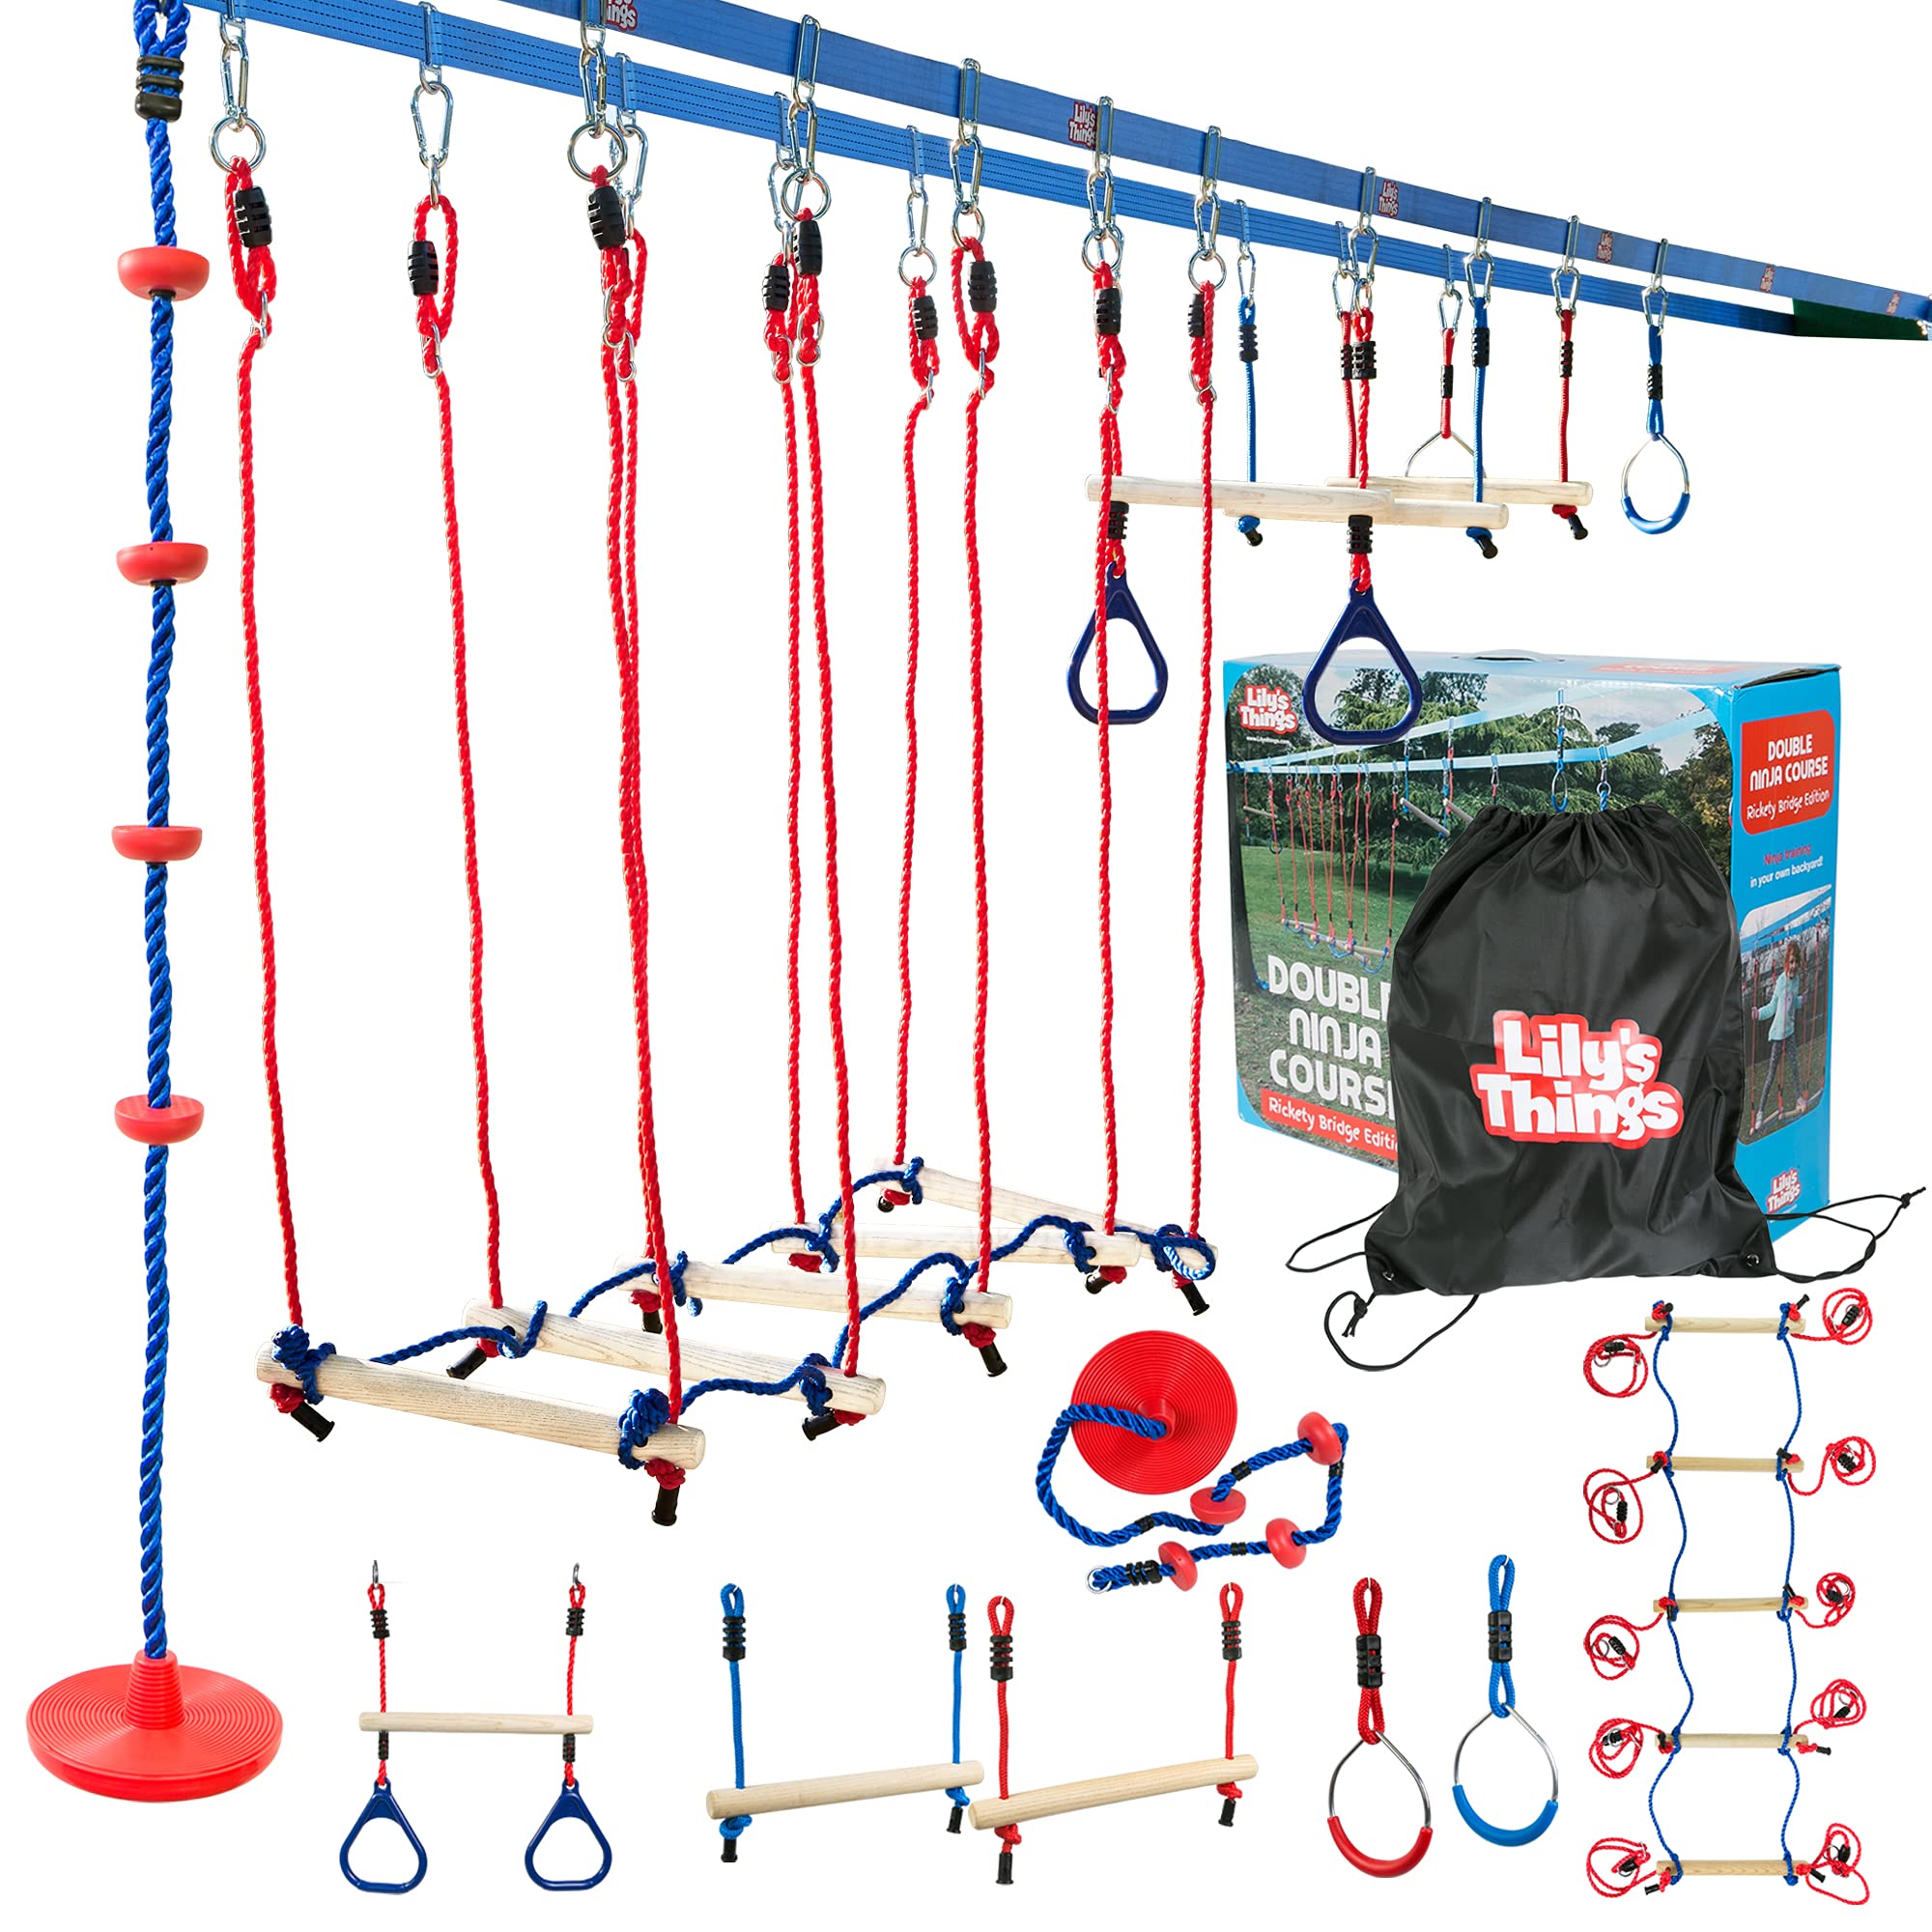 Lilys Things Ninja Slackline Obstacle course for Kids - 80 Foot Line - Monkey Bars Playground Equipment - Ninja Warrior course with Monkey Ba